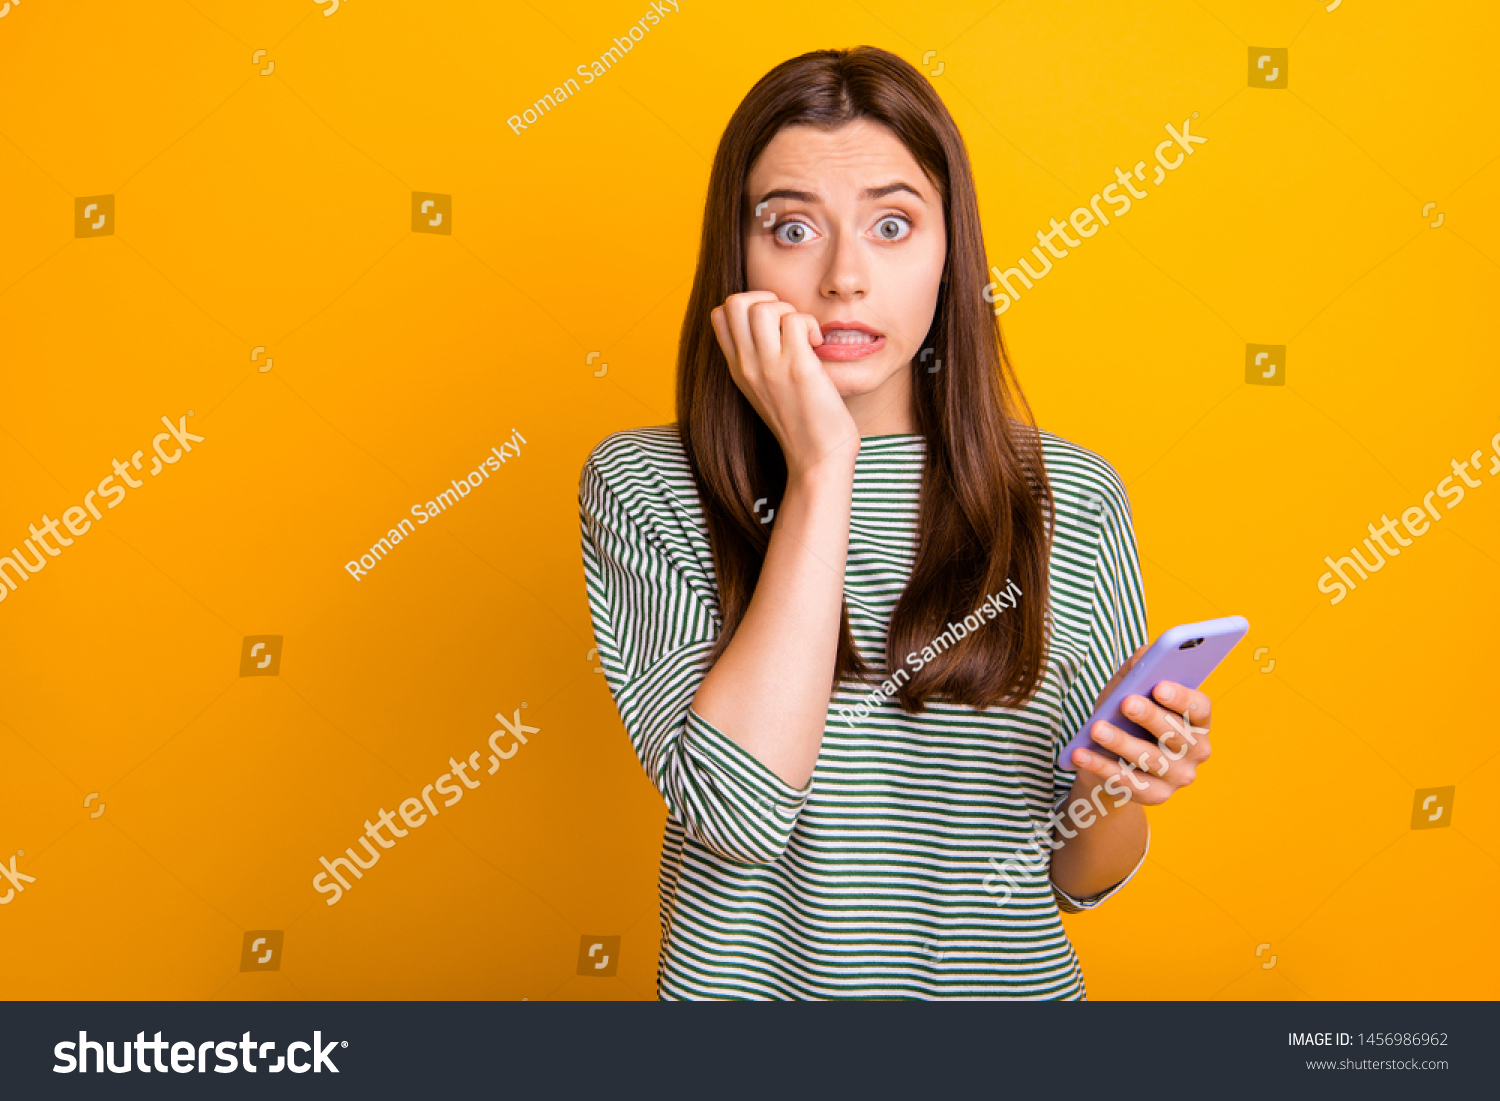 Photo of worried concerned girlfriend seeing her phone screen cracked and shattered to pieces while isolated with yellow background #1456986962